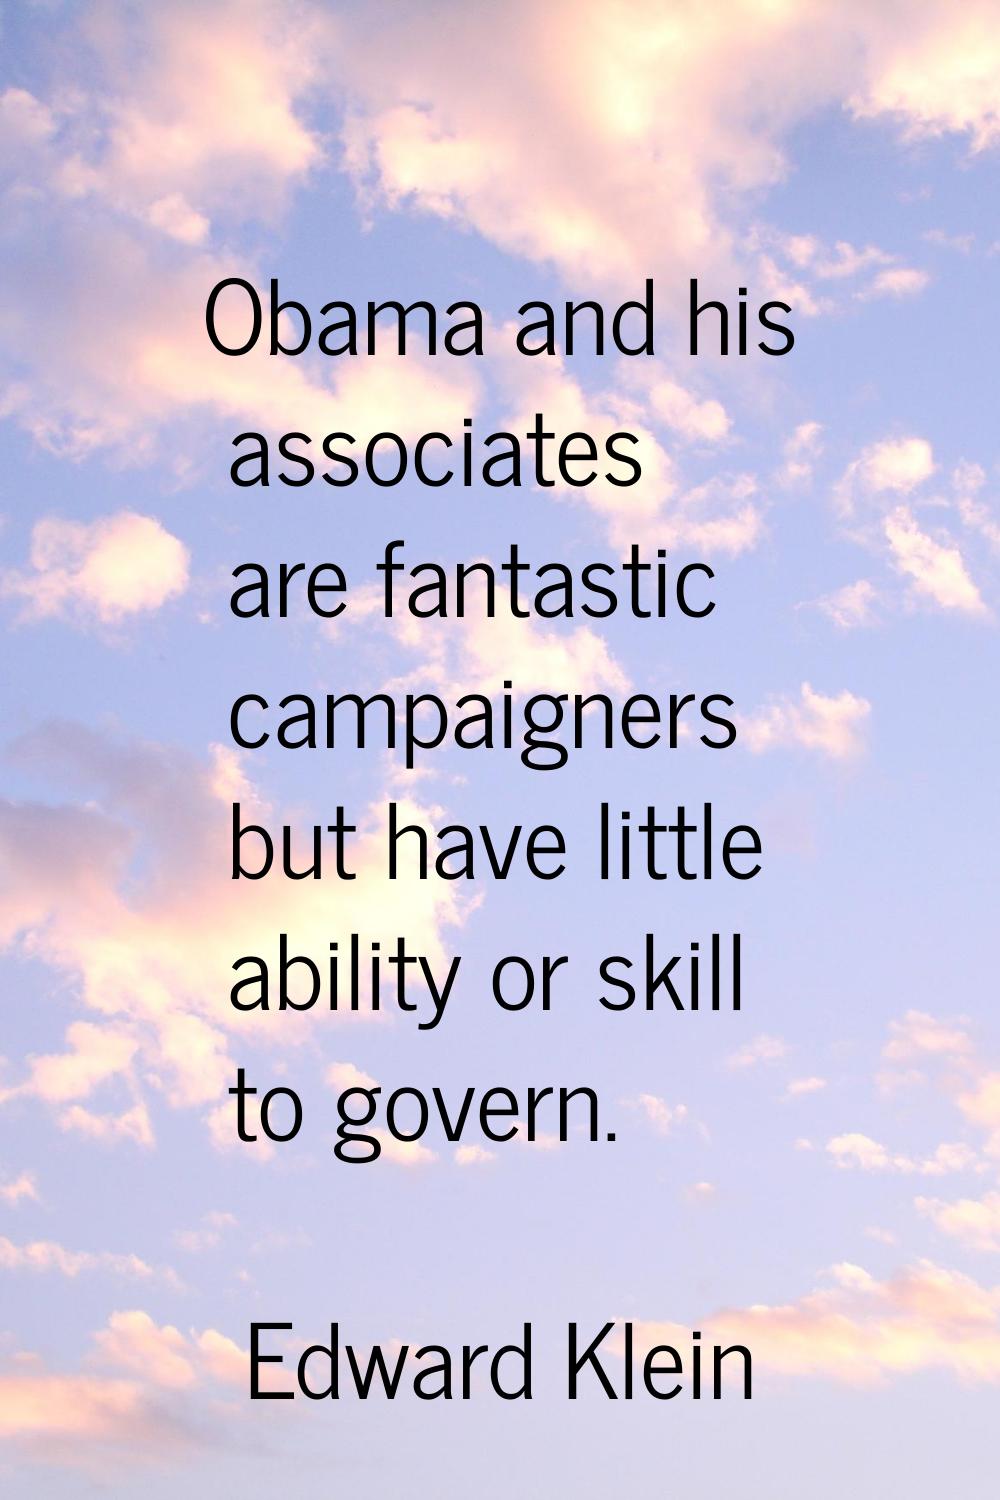 Obama and his associates are fantastic campaigners but have little ability or skill to govern.